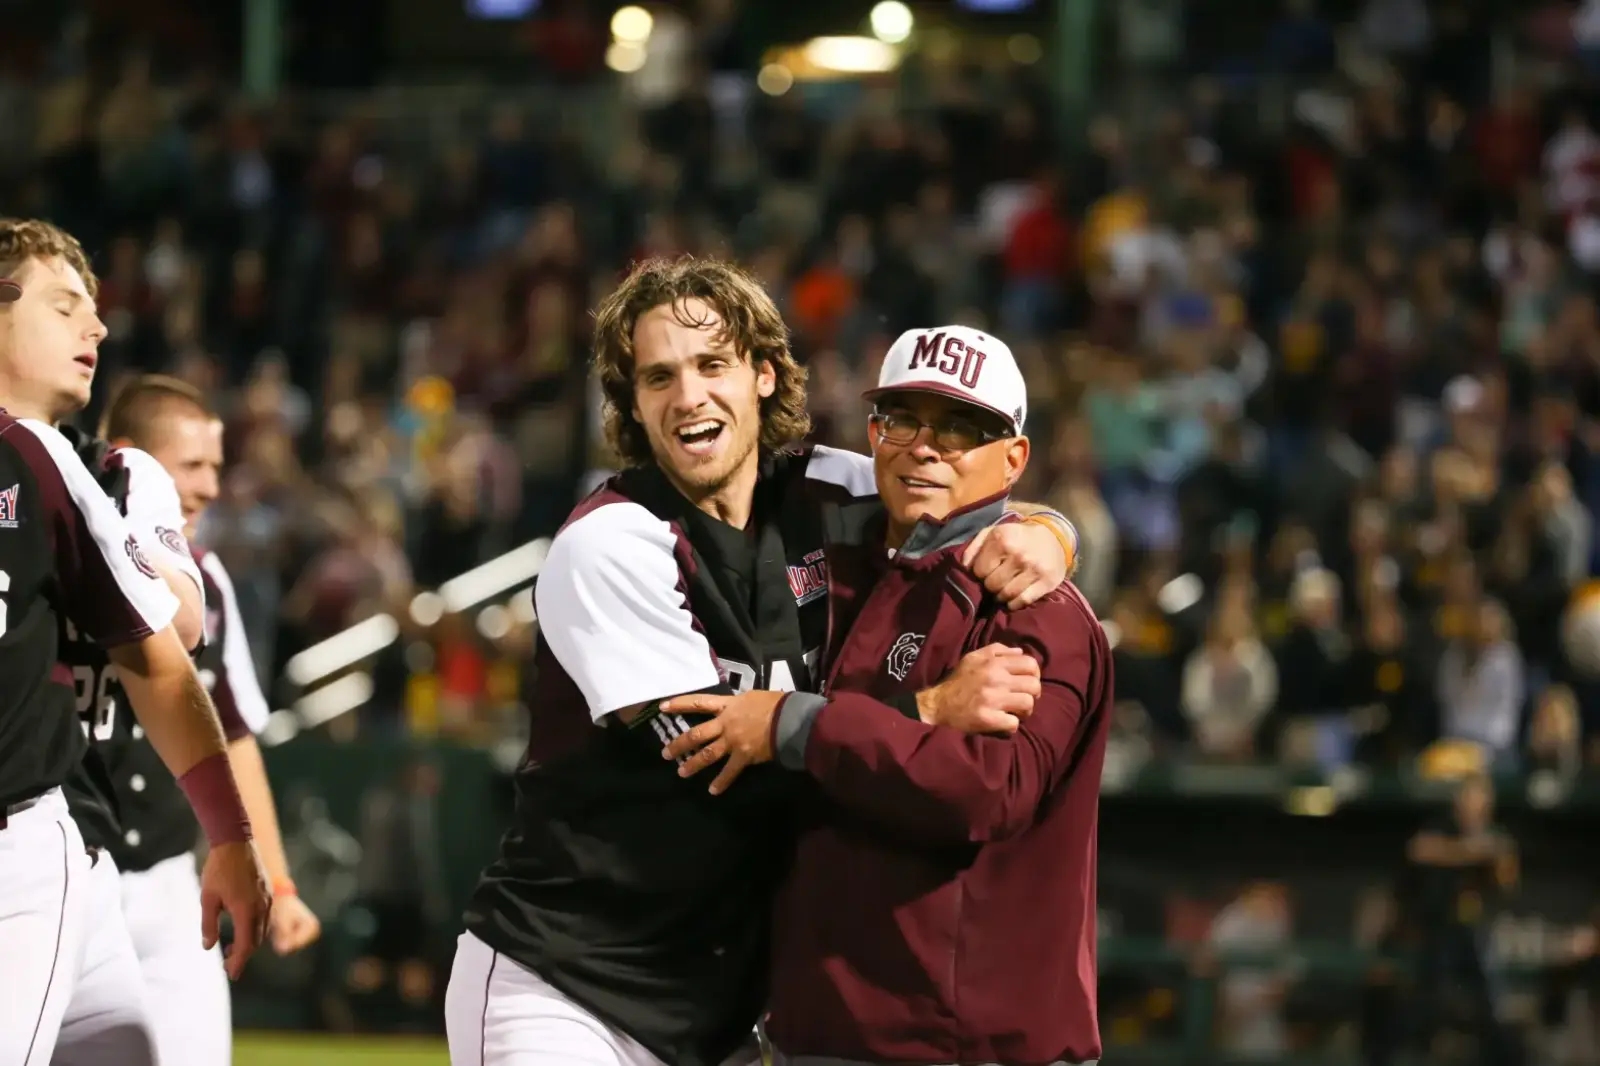 Nine years since Joey Hawkins celebrated the NCAA Springfield Regional championship with Coach Keith Guttin, he’s taking over as head coach of the Bears. (Photo by Missouri State University)